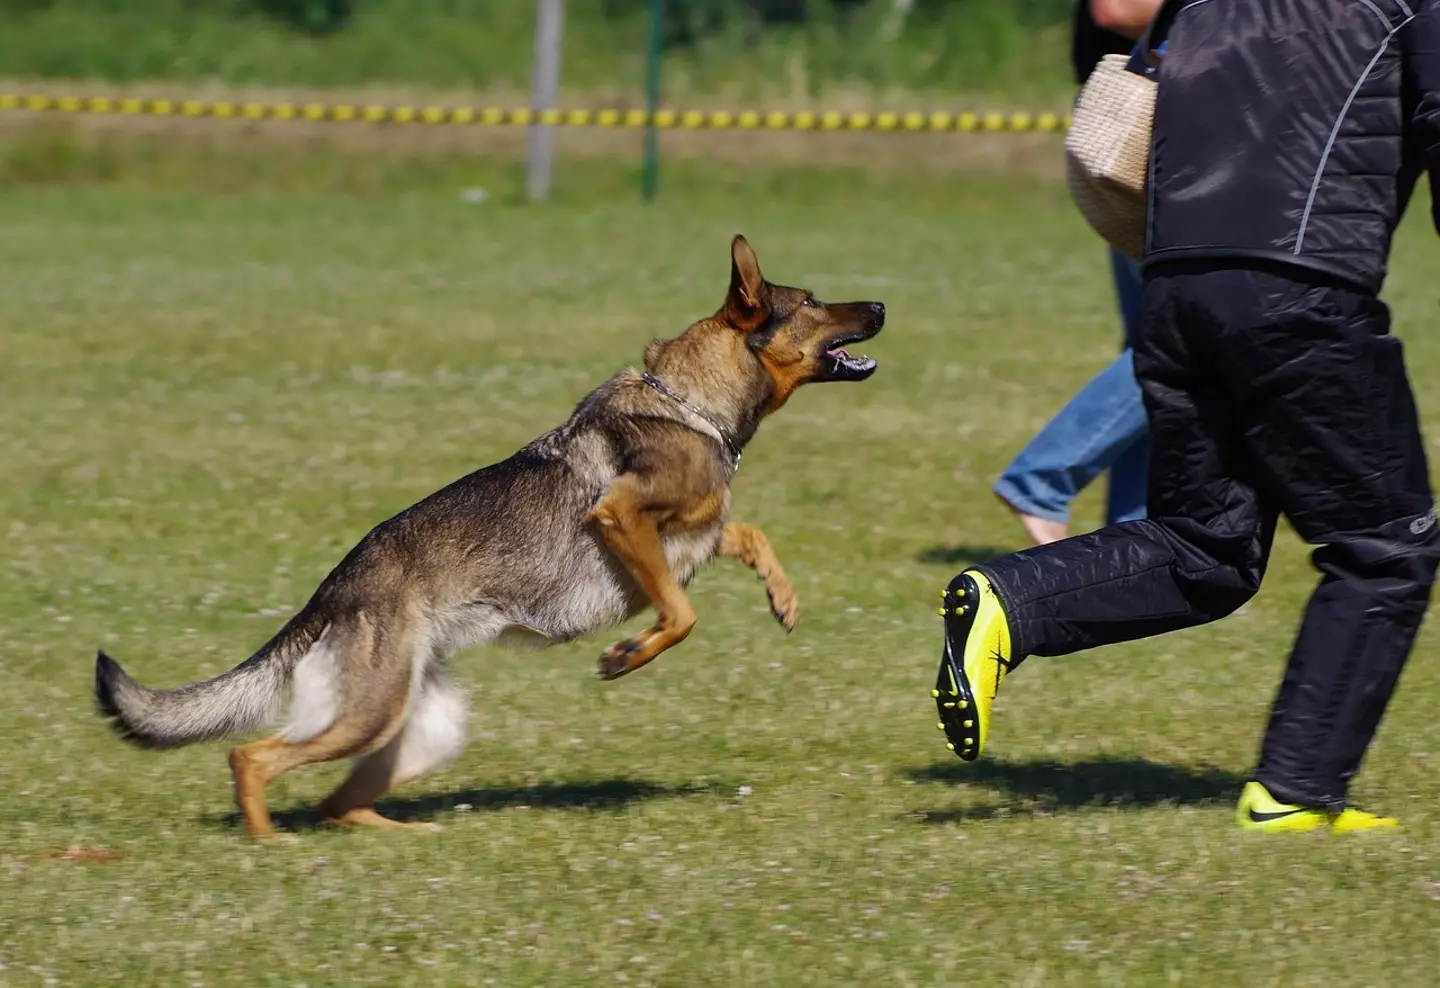 An expert has explained what to do if a dog attacks.